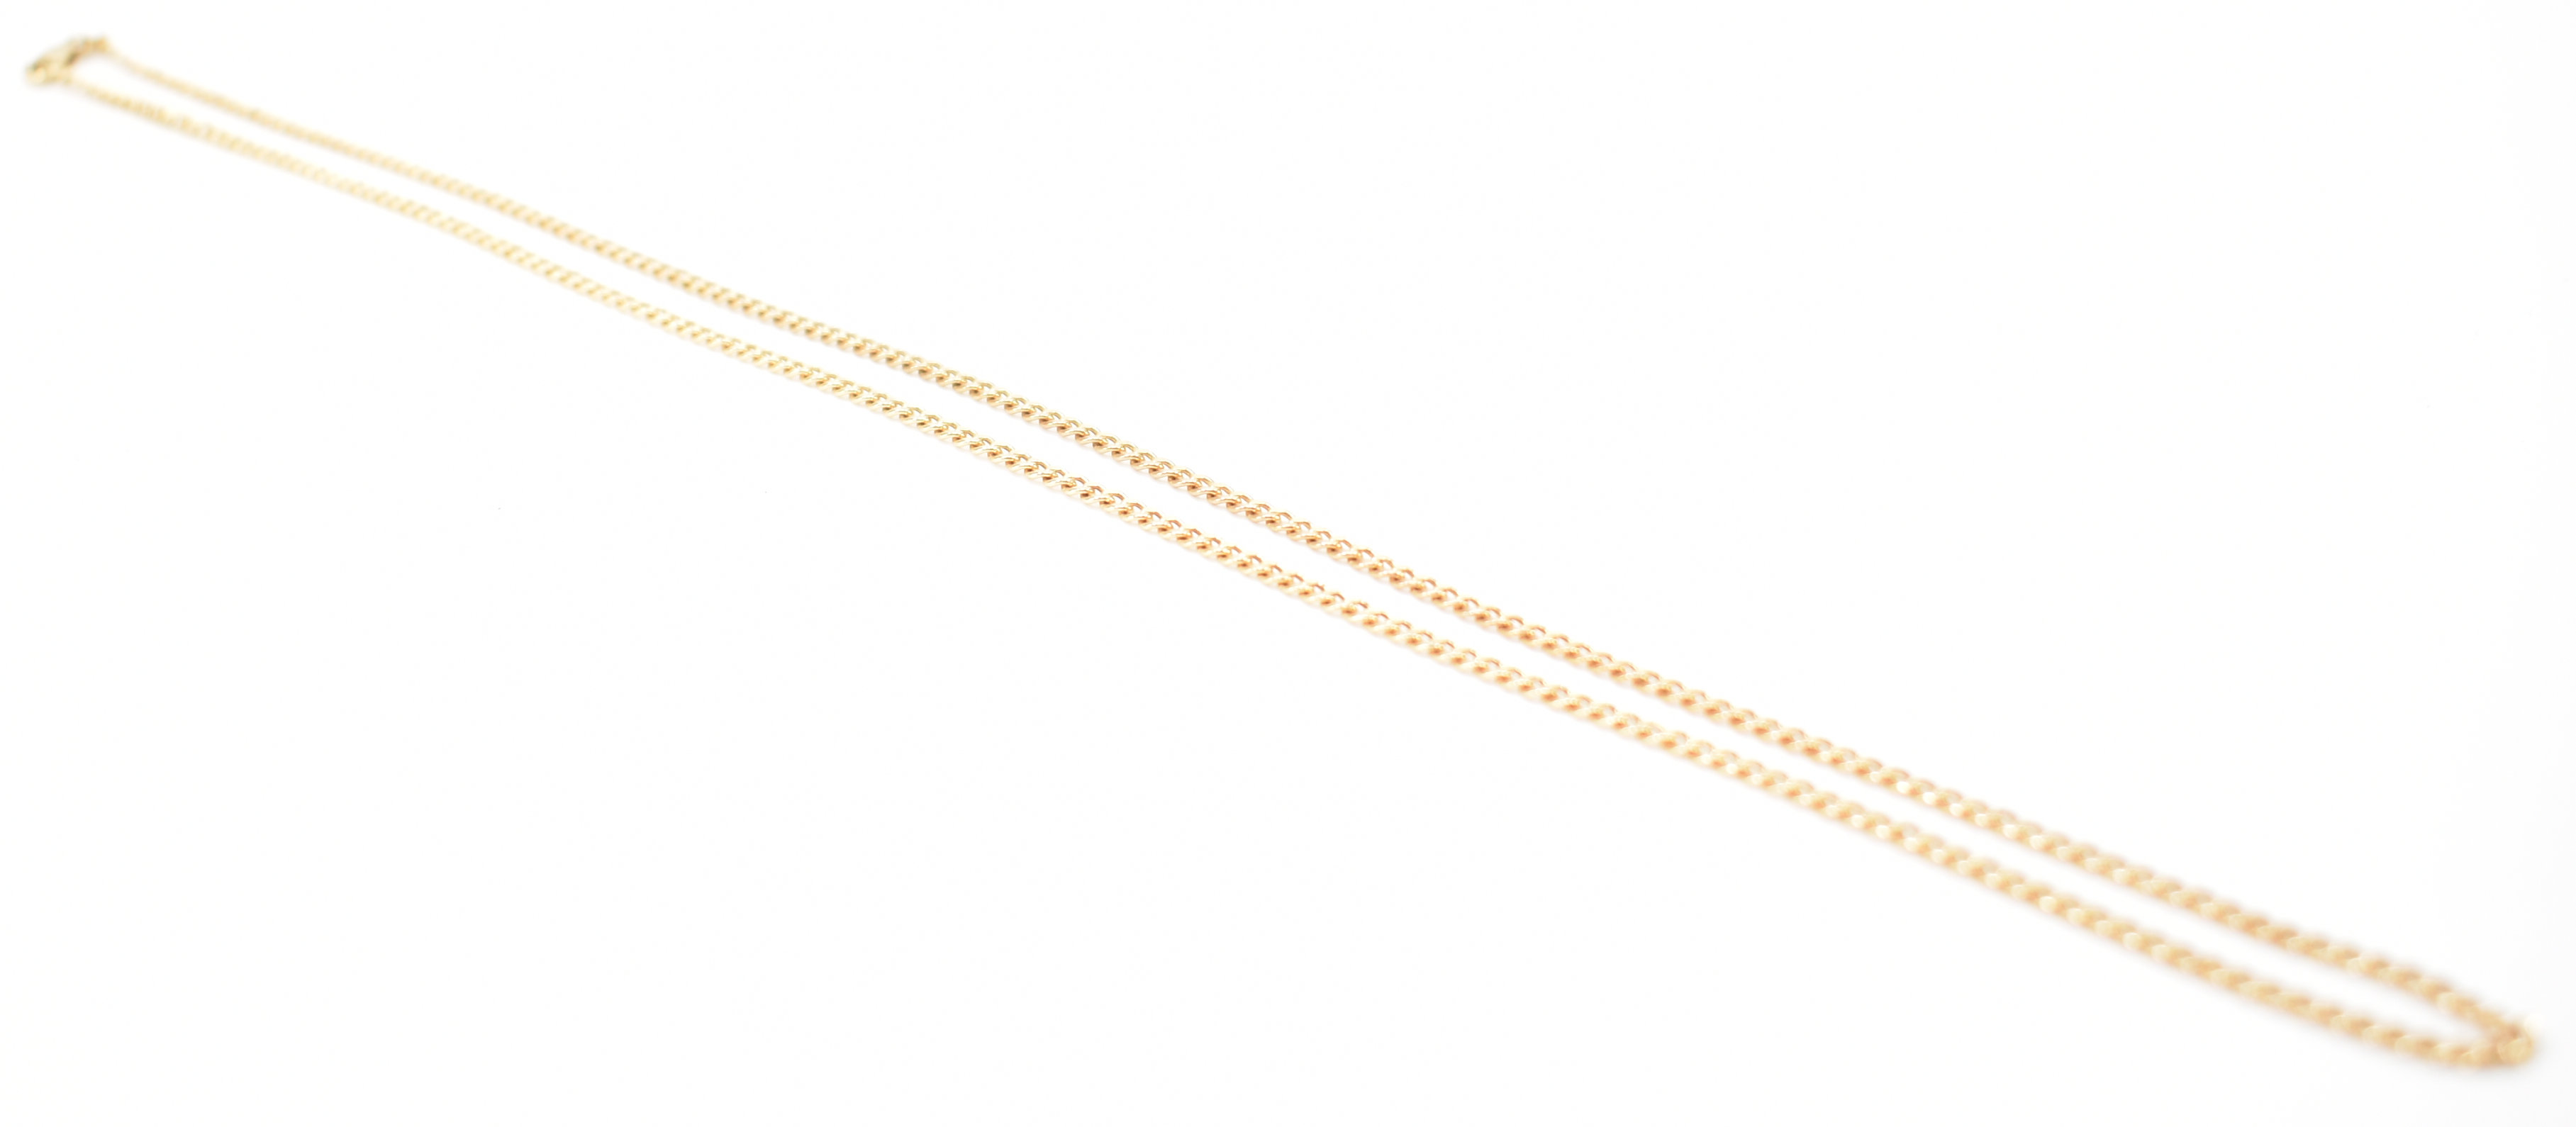 HALLMARKED 9CT GOLD FINE LINK NECKLACE CHAIN - Image 3 of 6